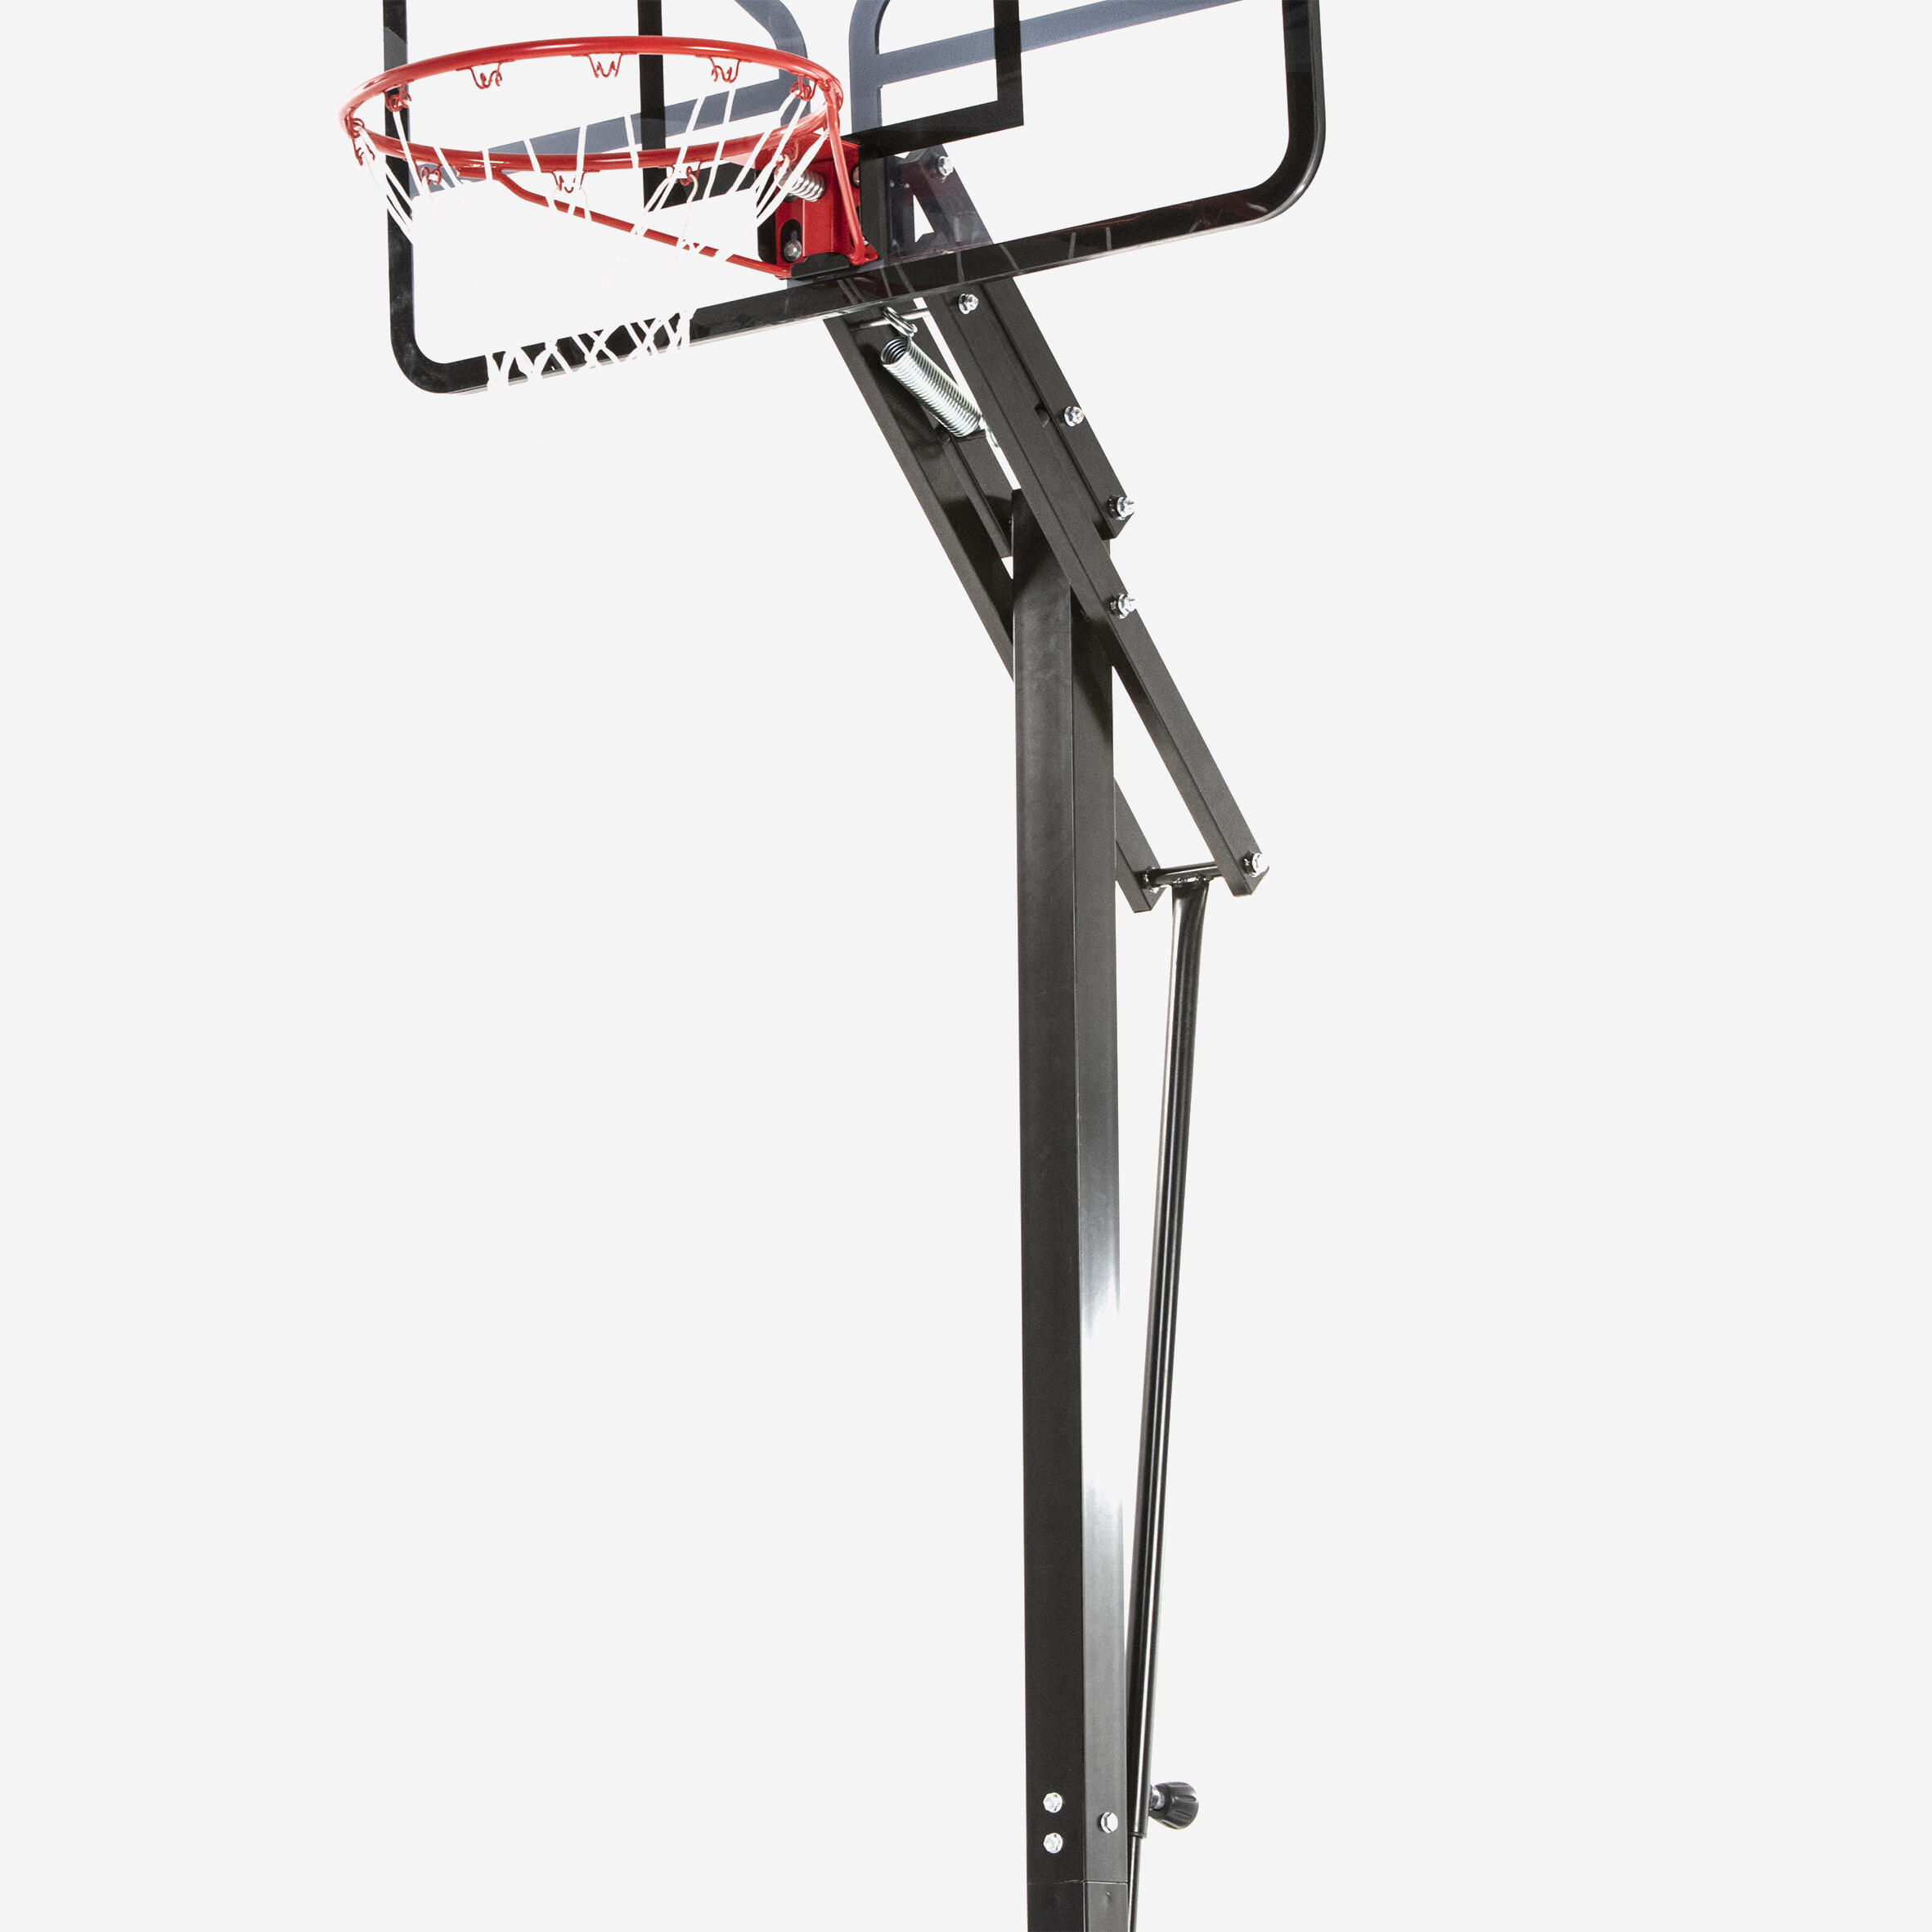 Basketball Hoop with Easy-Adjustment Stand (2.40m to 3.05m) B700 Pro 7/10